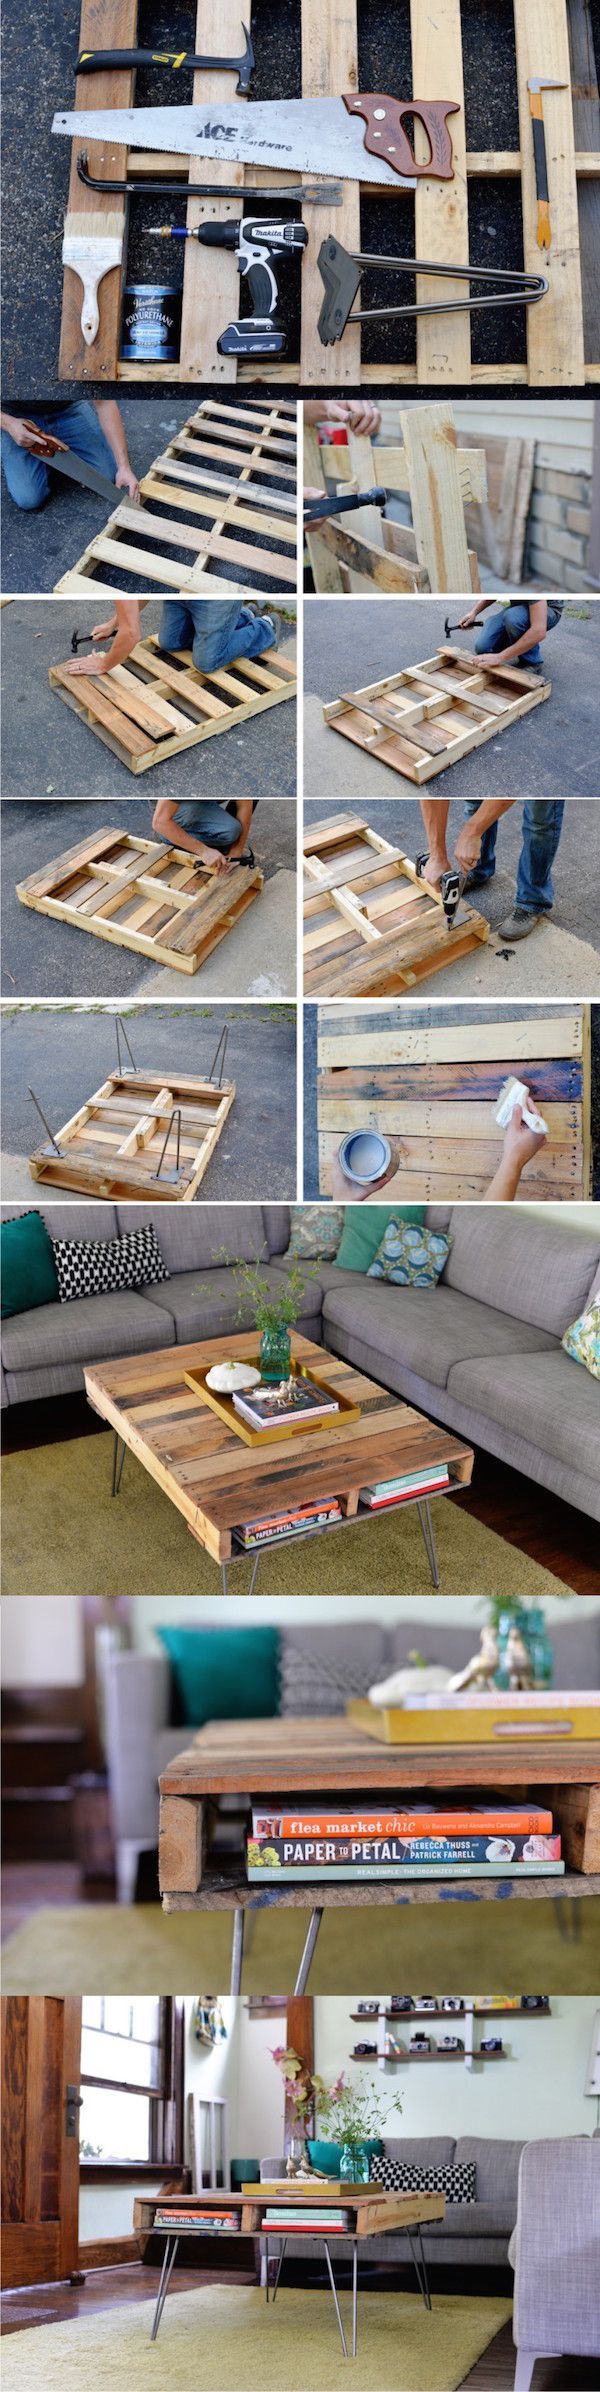 Although we have seen many examples of pallet coffee tables, we never tired of how easy it is to create nice and versatile coffee